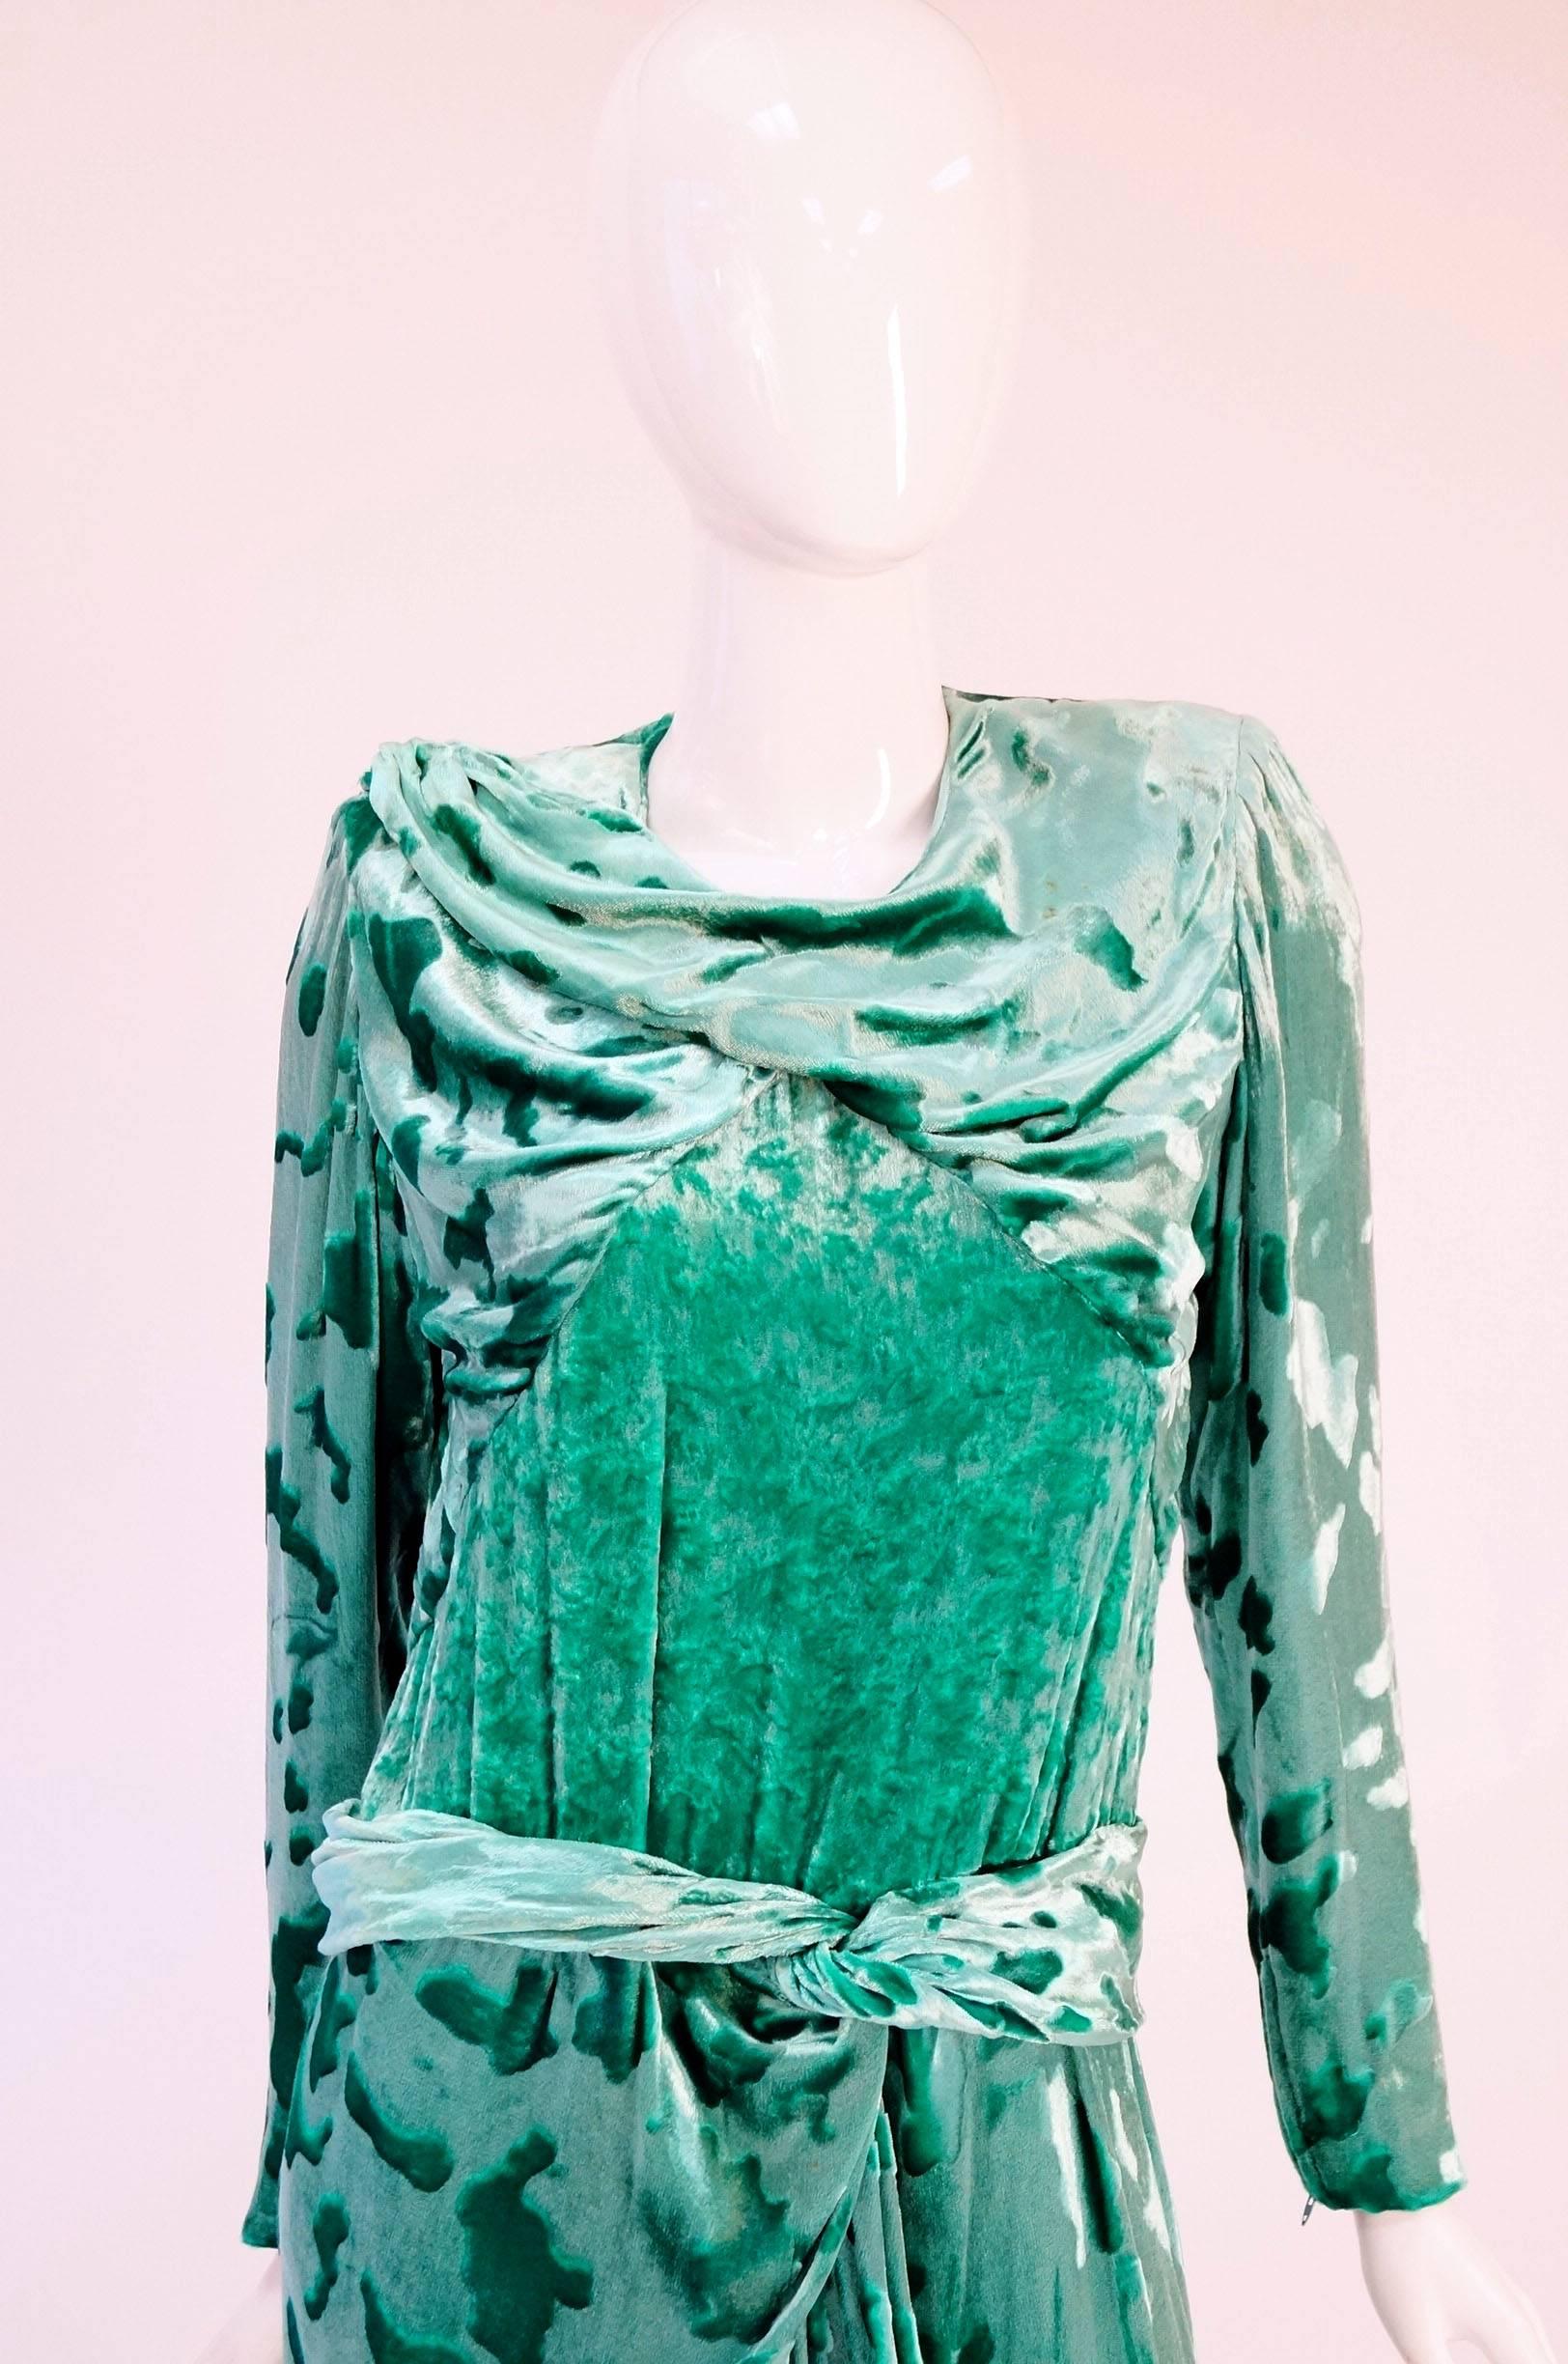 
Striking green crushed velvet by couturier James Galanos for Neiman Marcus! This fun, bright dress has long sleeves with zipper closures, a draped neckline, and padded shoulders. The dress is composed of an abstract crushed velvet fabric in